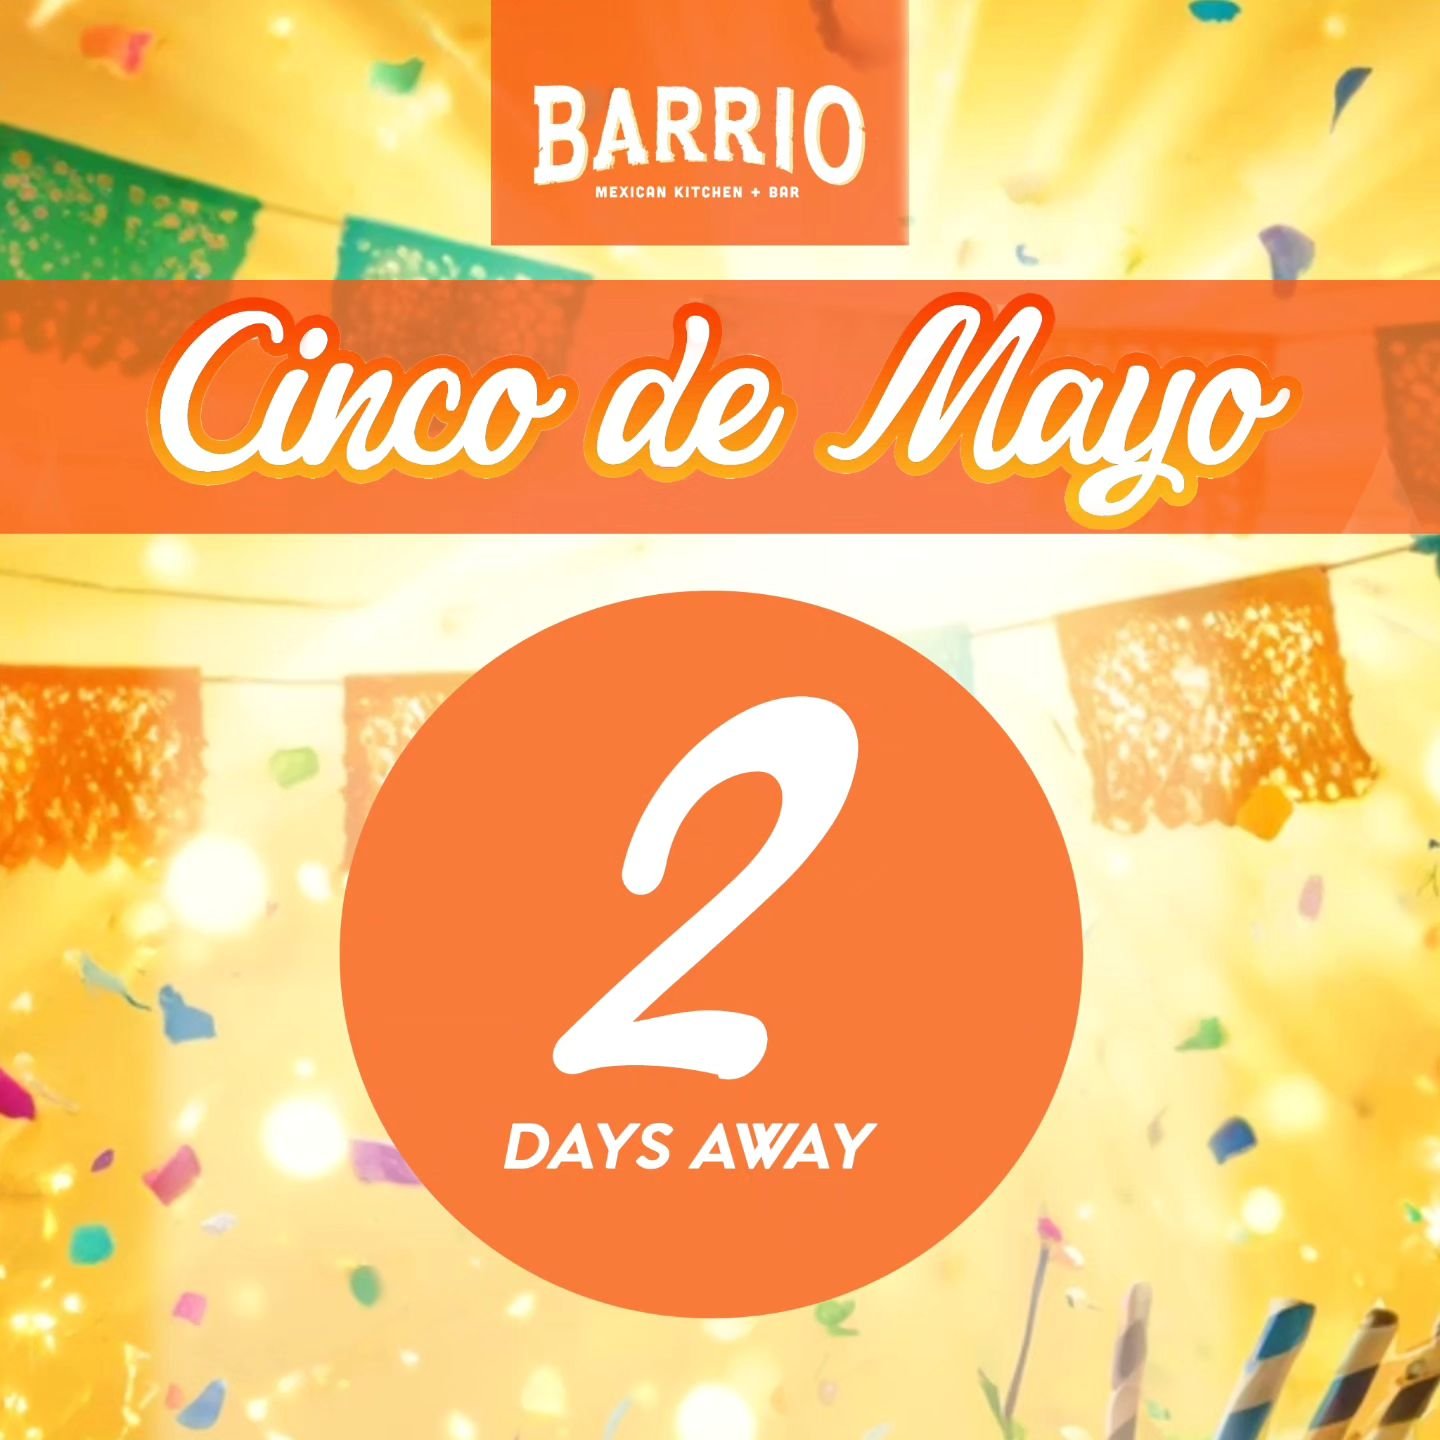 Cinco de Mayo is just 2 DAYS AWAY. Raise your hand if you&rsquo;re&nbsp;&nbsp;ready!&nbsp;🙋&zwj;♀️🙋🏻&zwj;♂️🥳

We'll have drink specials &amp; live entertainment! Plus at our Barrio Taqueria location we'll have a condensed menu. 

Learn more:
barr